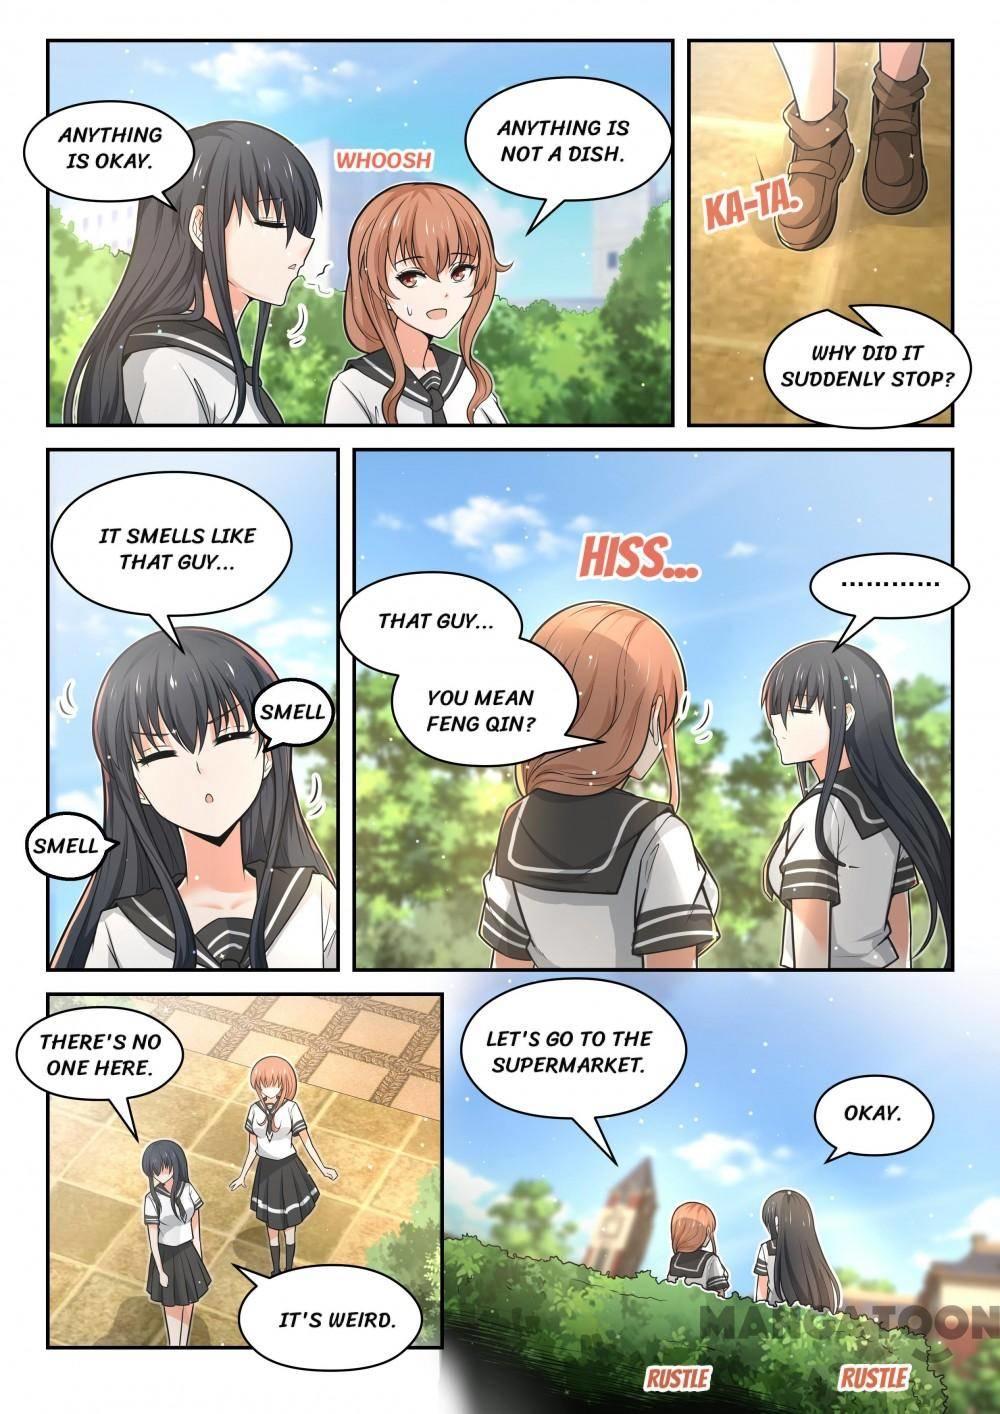 The Boy In The All-Girls School Chapter 473 page 6 - Mangakakalot